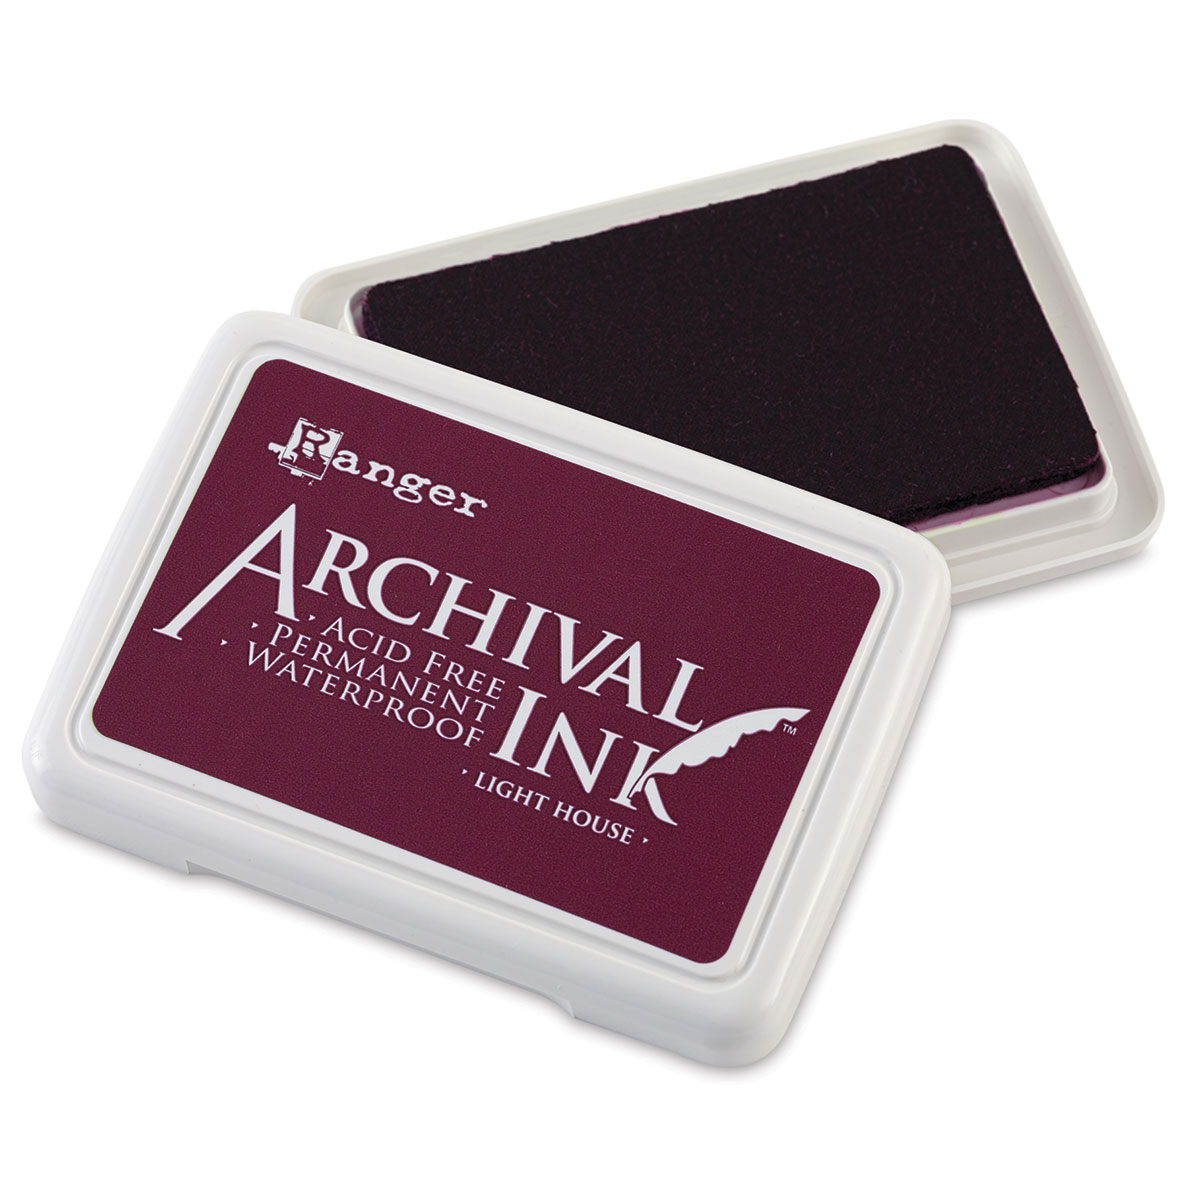 Ranger - Archival Mini Ink Pads Kits 1-4, Bundle of Kit 1, 2, 3, and 4 —  Grand River Art Supply